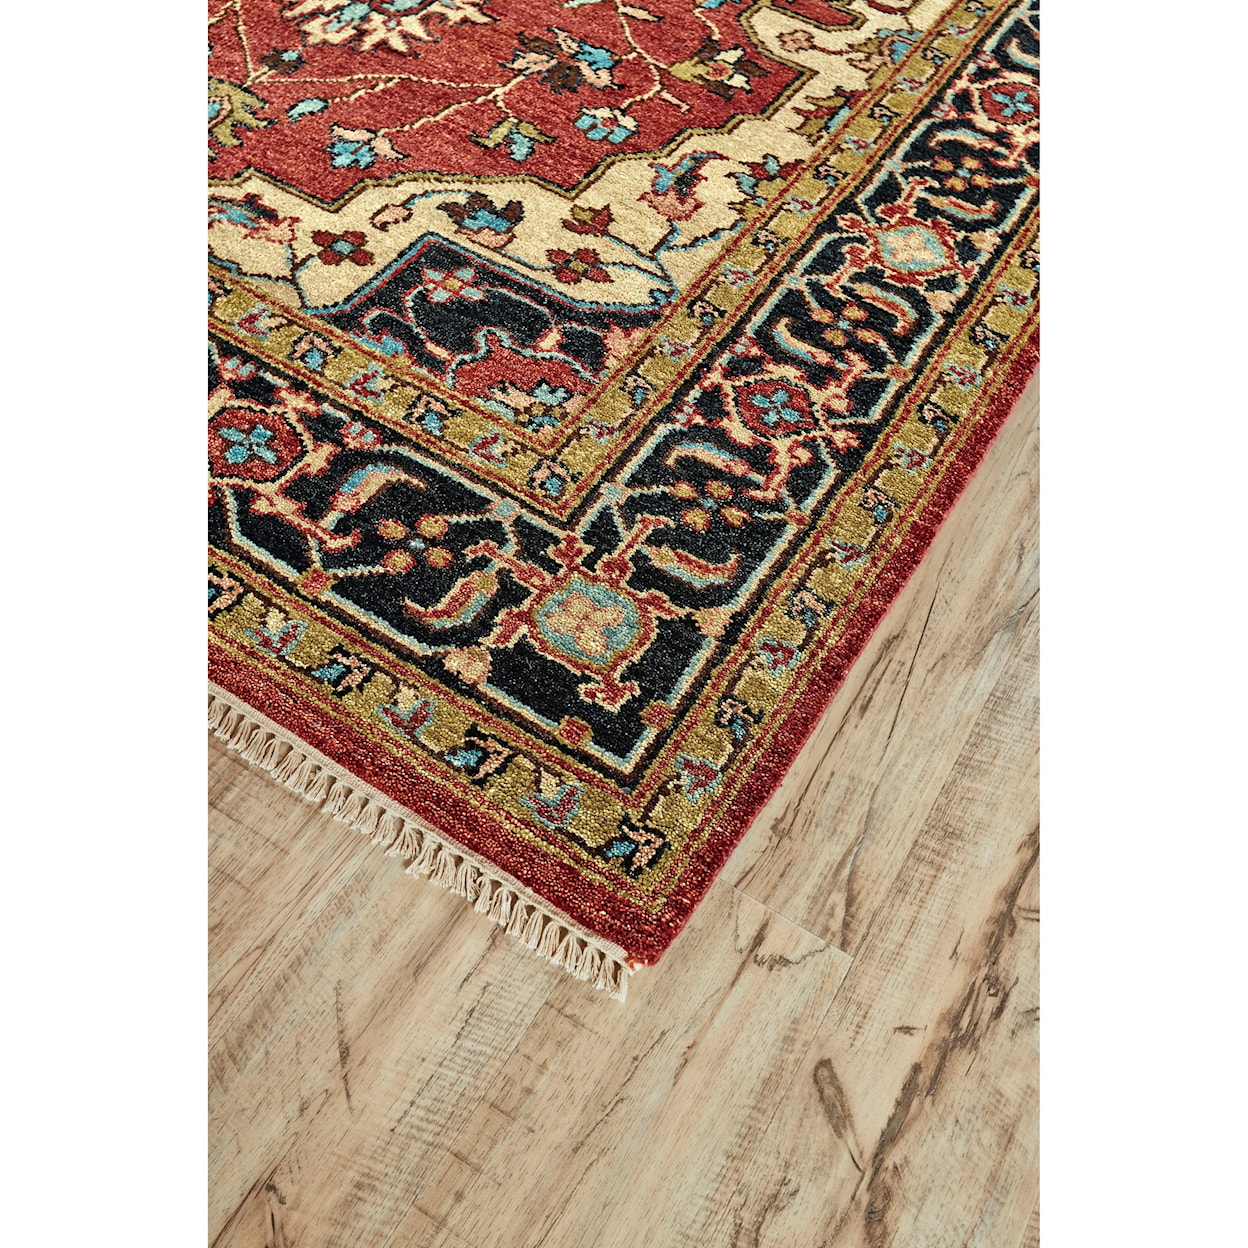 Feizy Rugs Ustad Red/Black 2' x 3' Area Rug